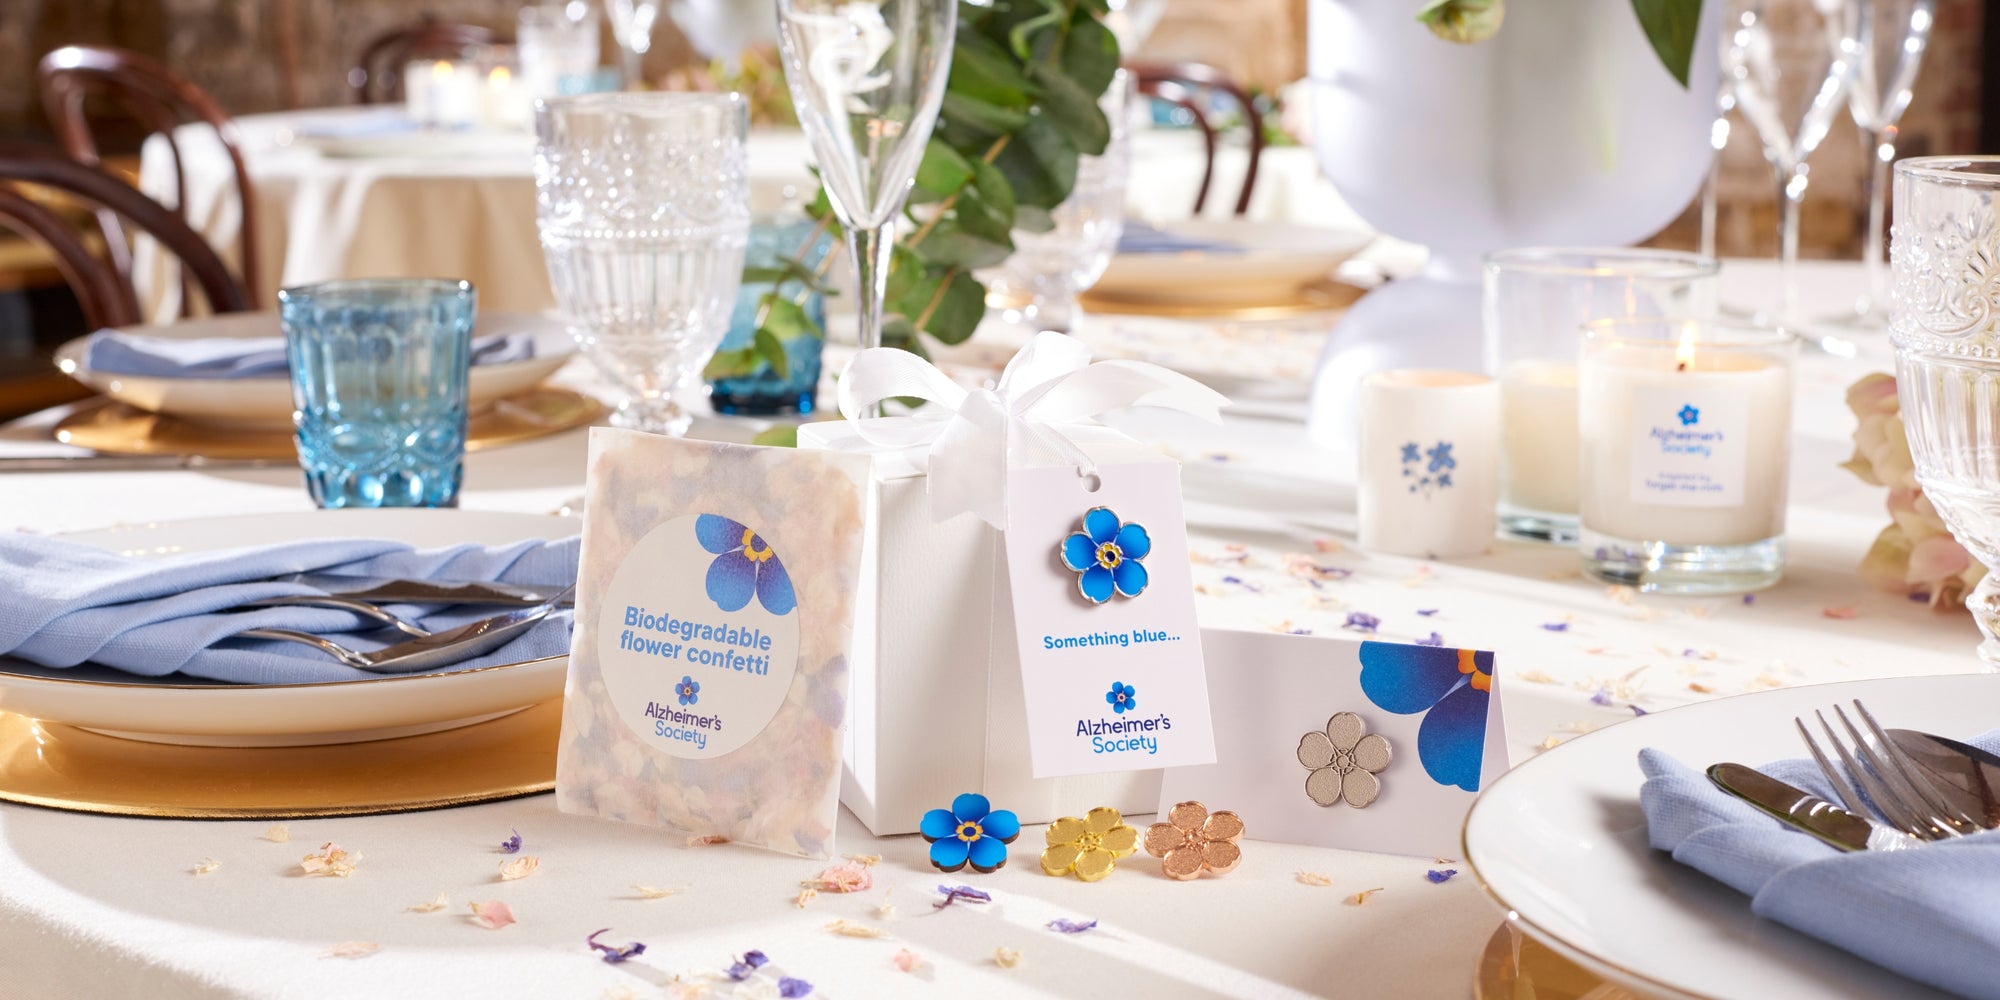 A wedding table set with a collection of wedding favours such as pin badges, confetti and gift tags from Alzheimer's Society